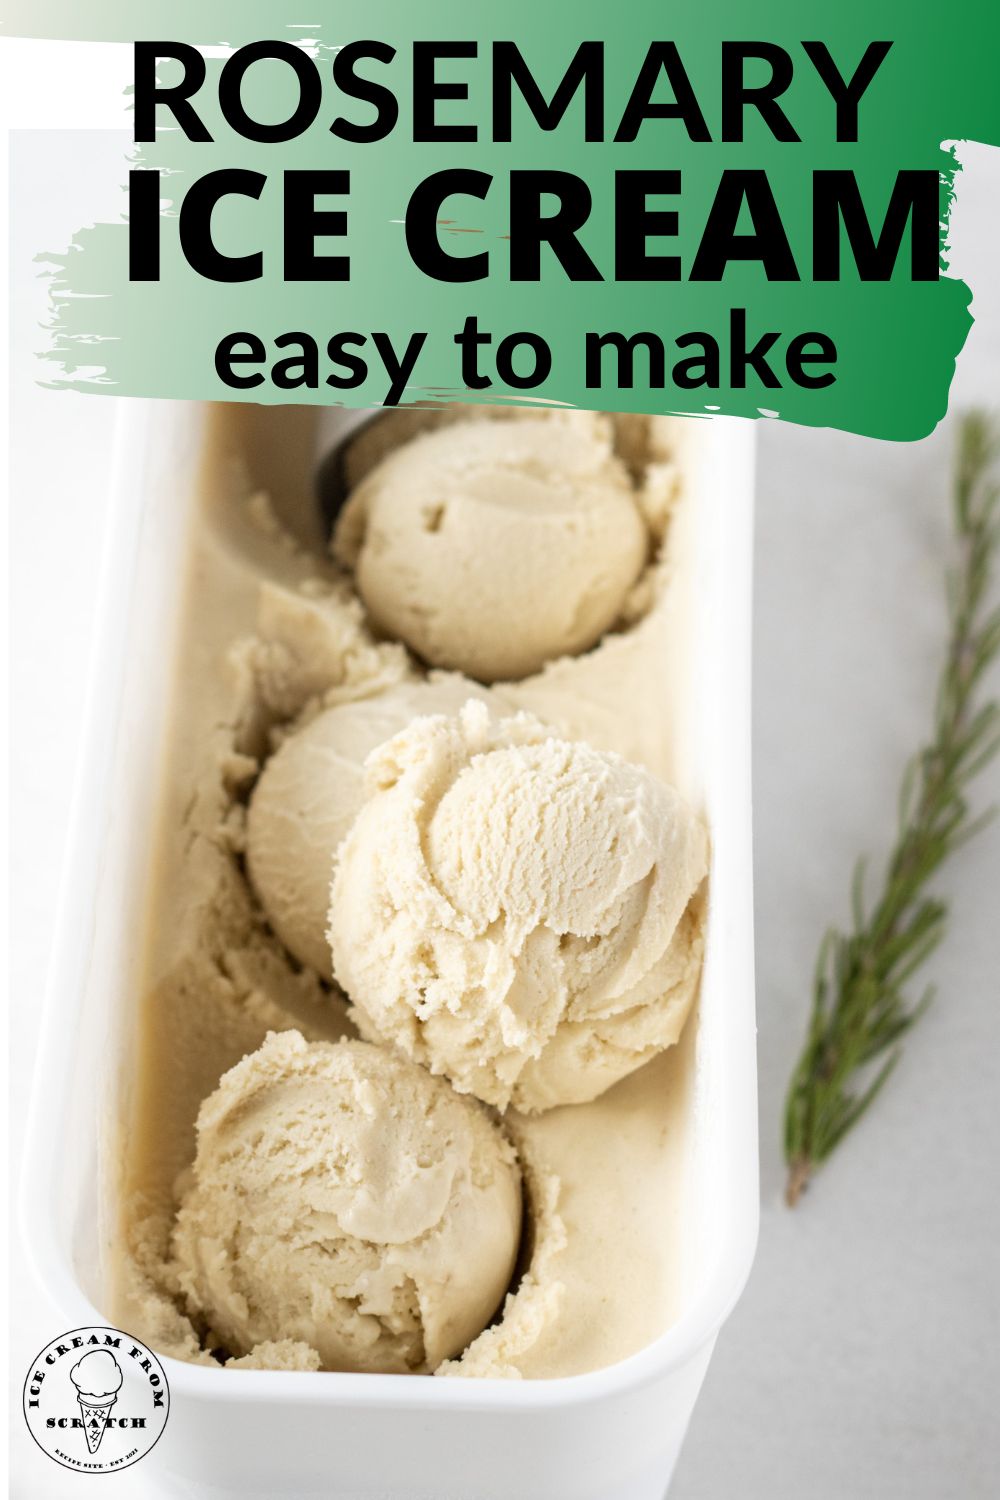 a white rectangular container of ice cream. Green text overlay says "Rosemary Ice Cream, Easy to Make"